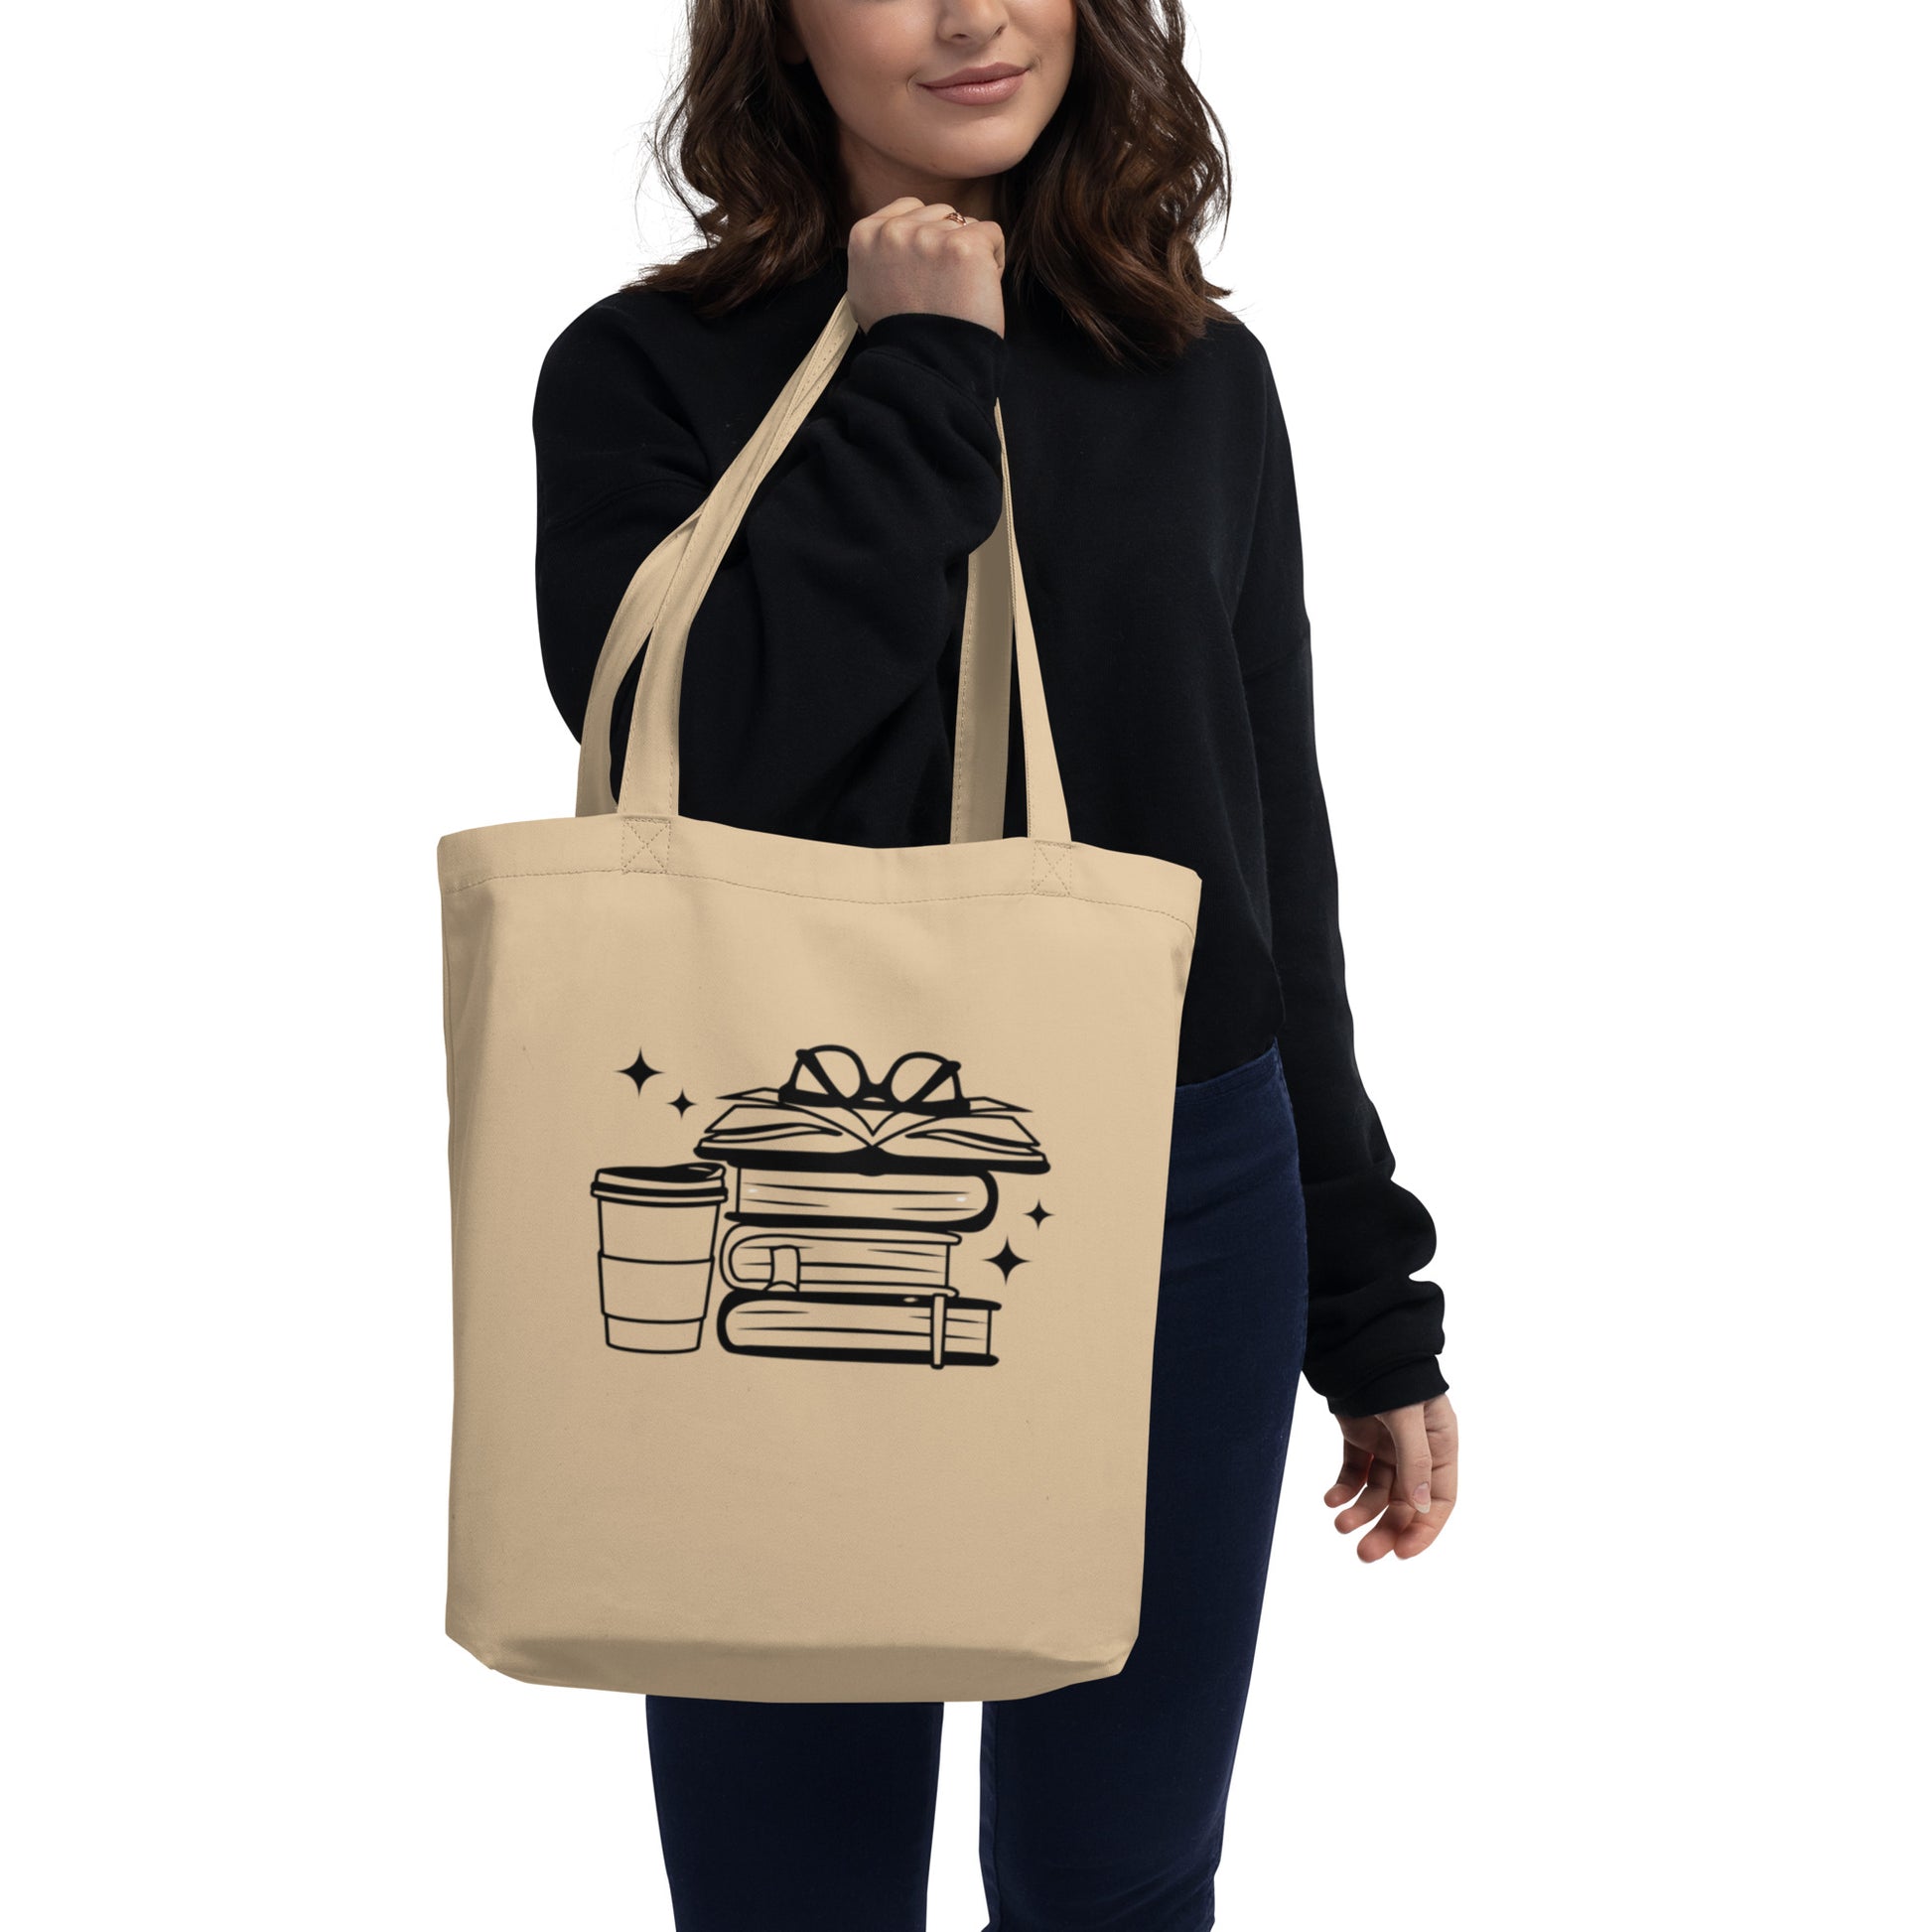 woman holding tan tote bag with stack of books graphic